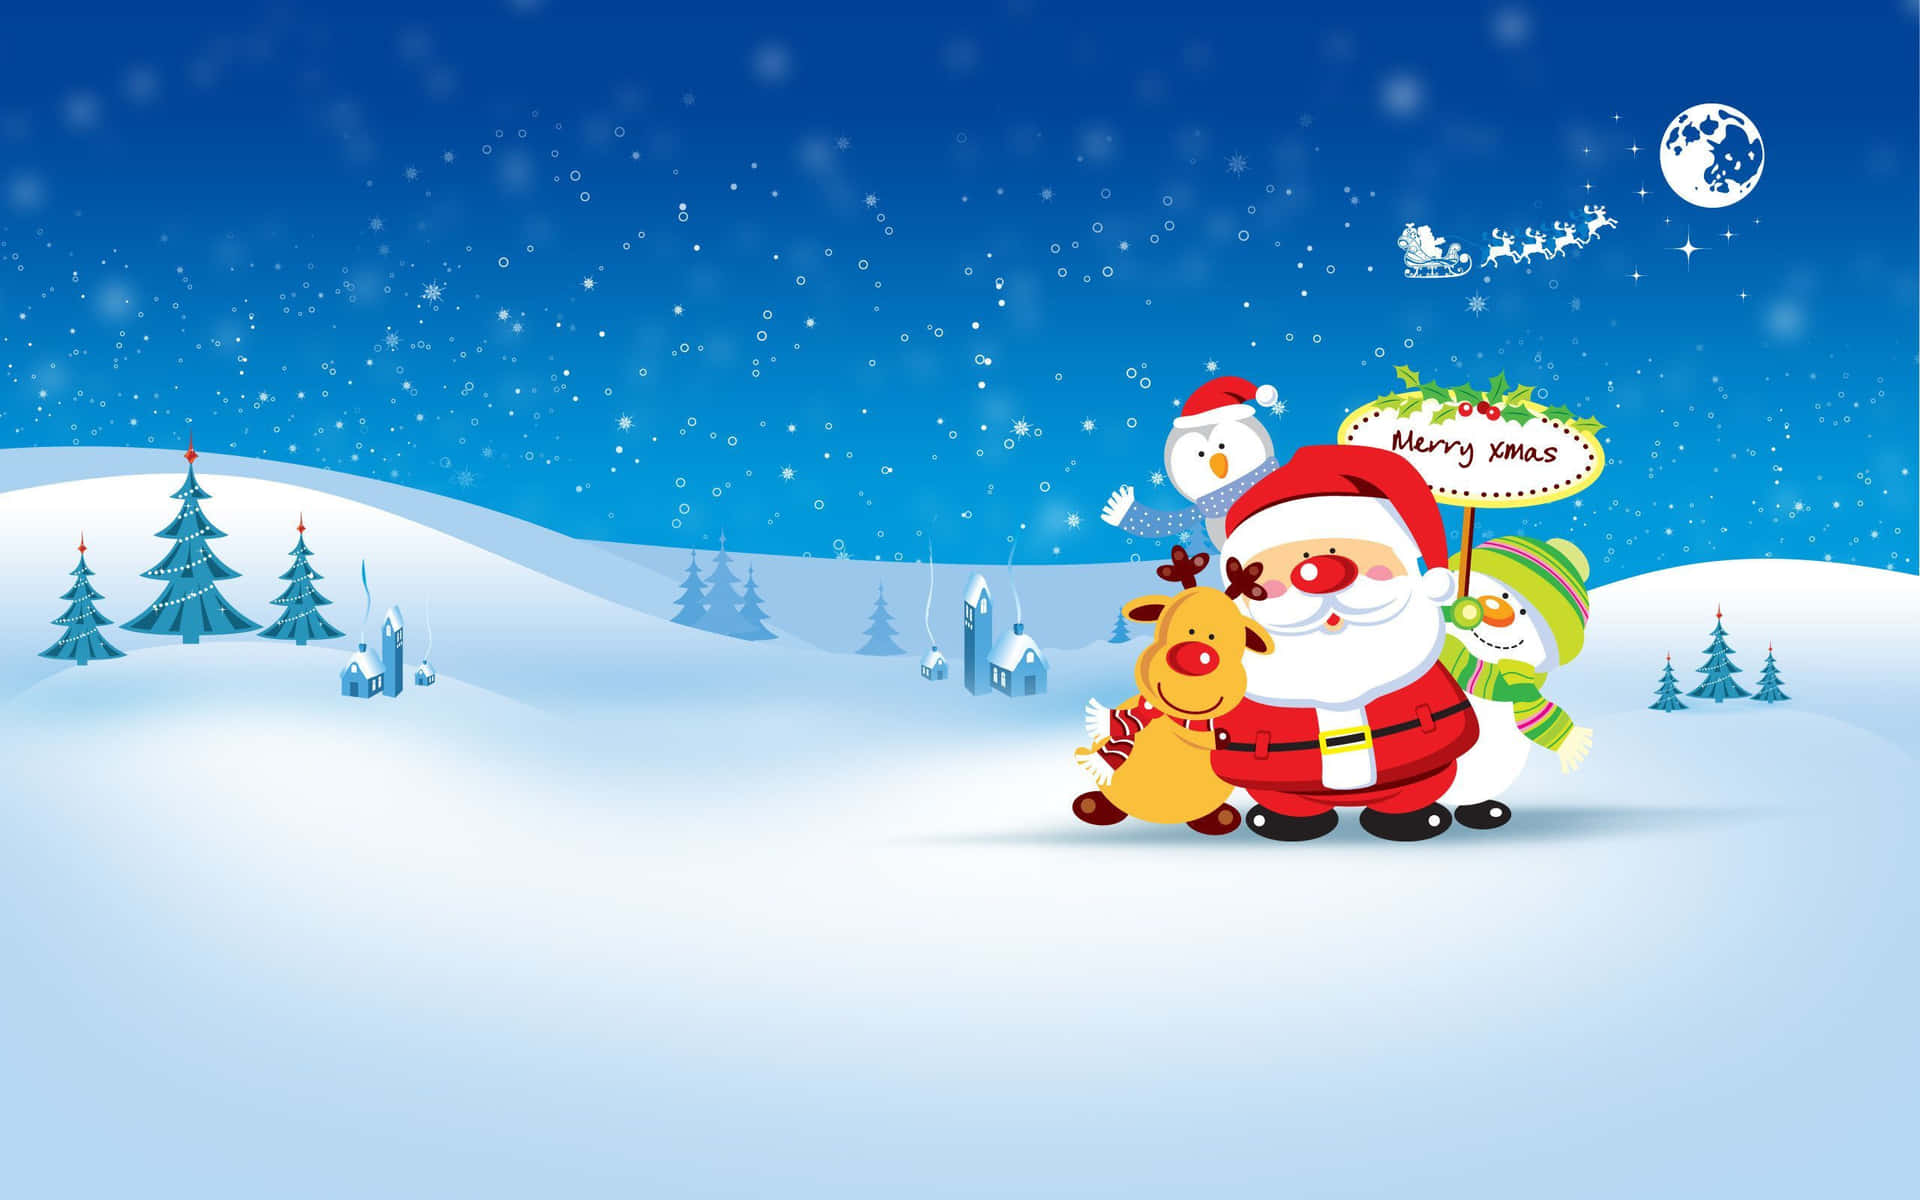 Winter Holiday Desktop With Santa Claus And Friends Wallpaper